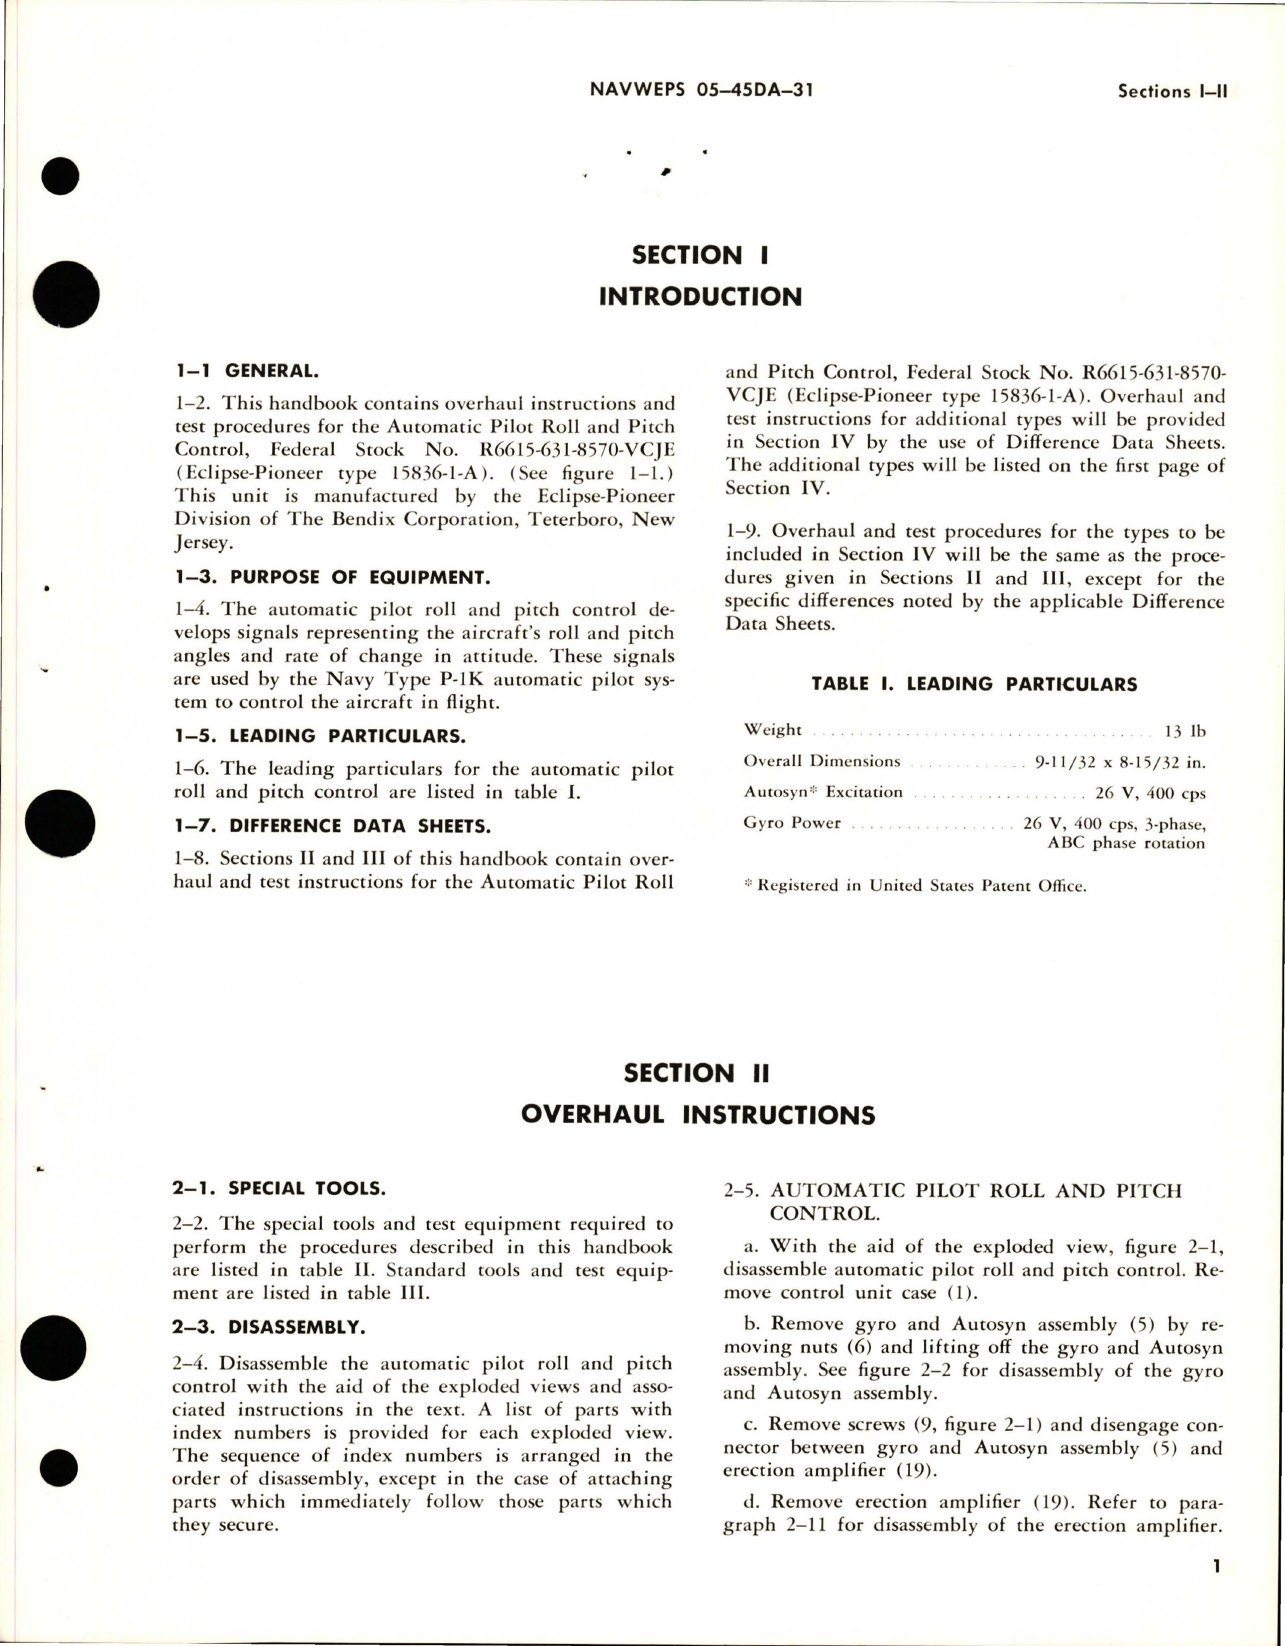 Sample page 7 from AirCorps Library document: Overhaul Instructions for Automatic Pilot Roll and Pitch Control - Part 15836-1-A 